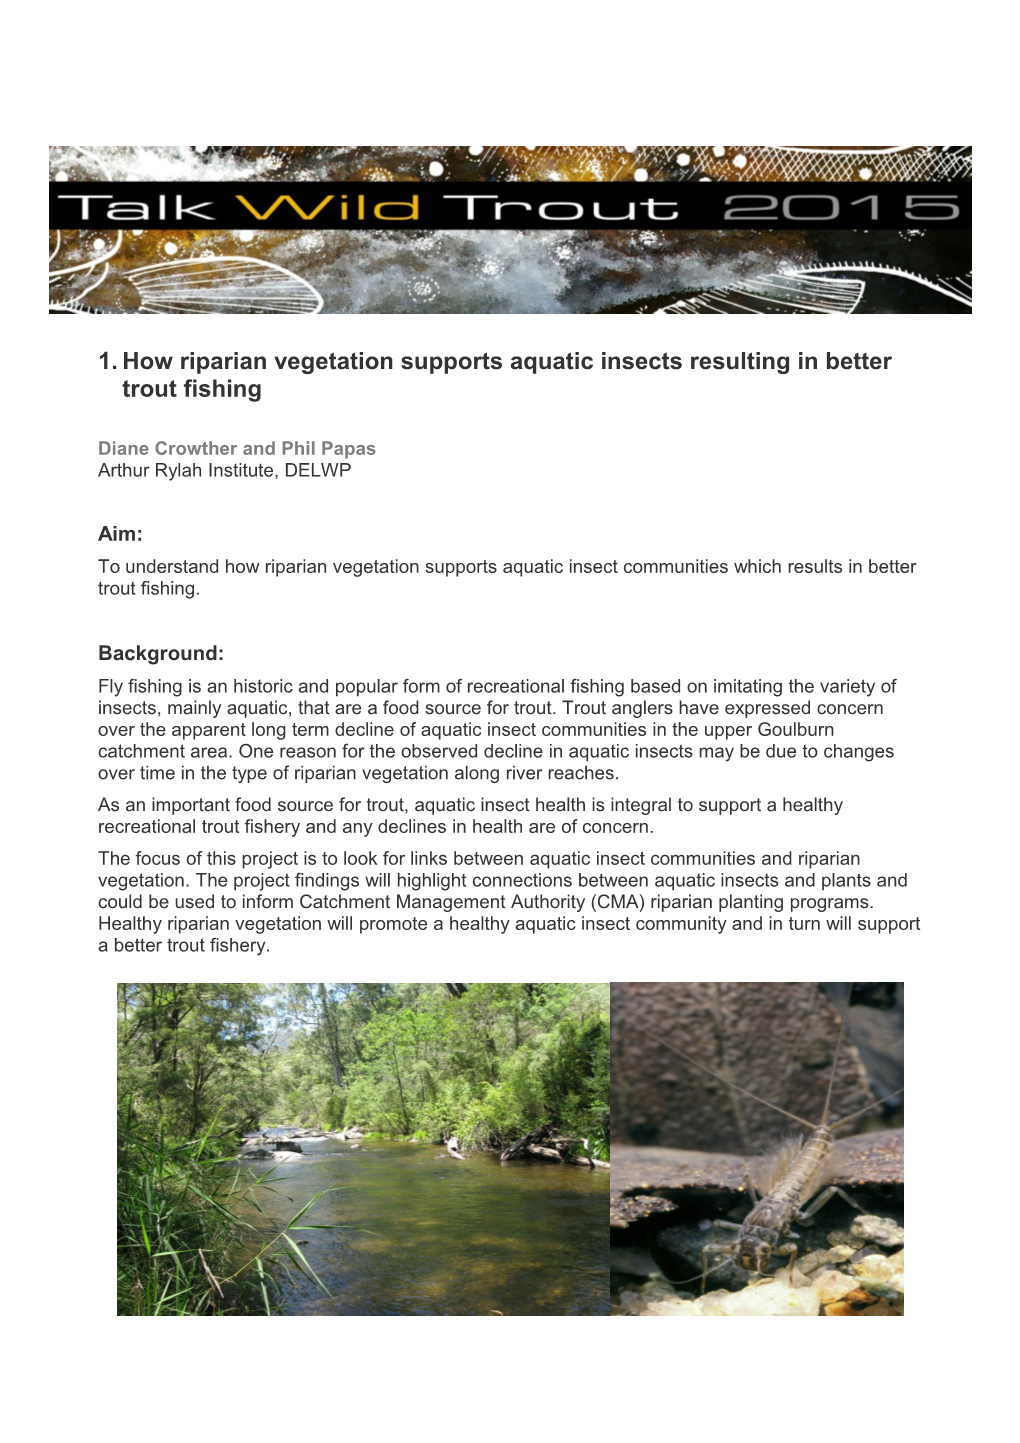 How Riparian Vegetation Supports Aquatic Insects Resulting in Better Trout Fishing